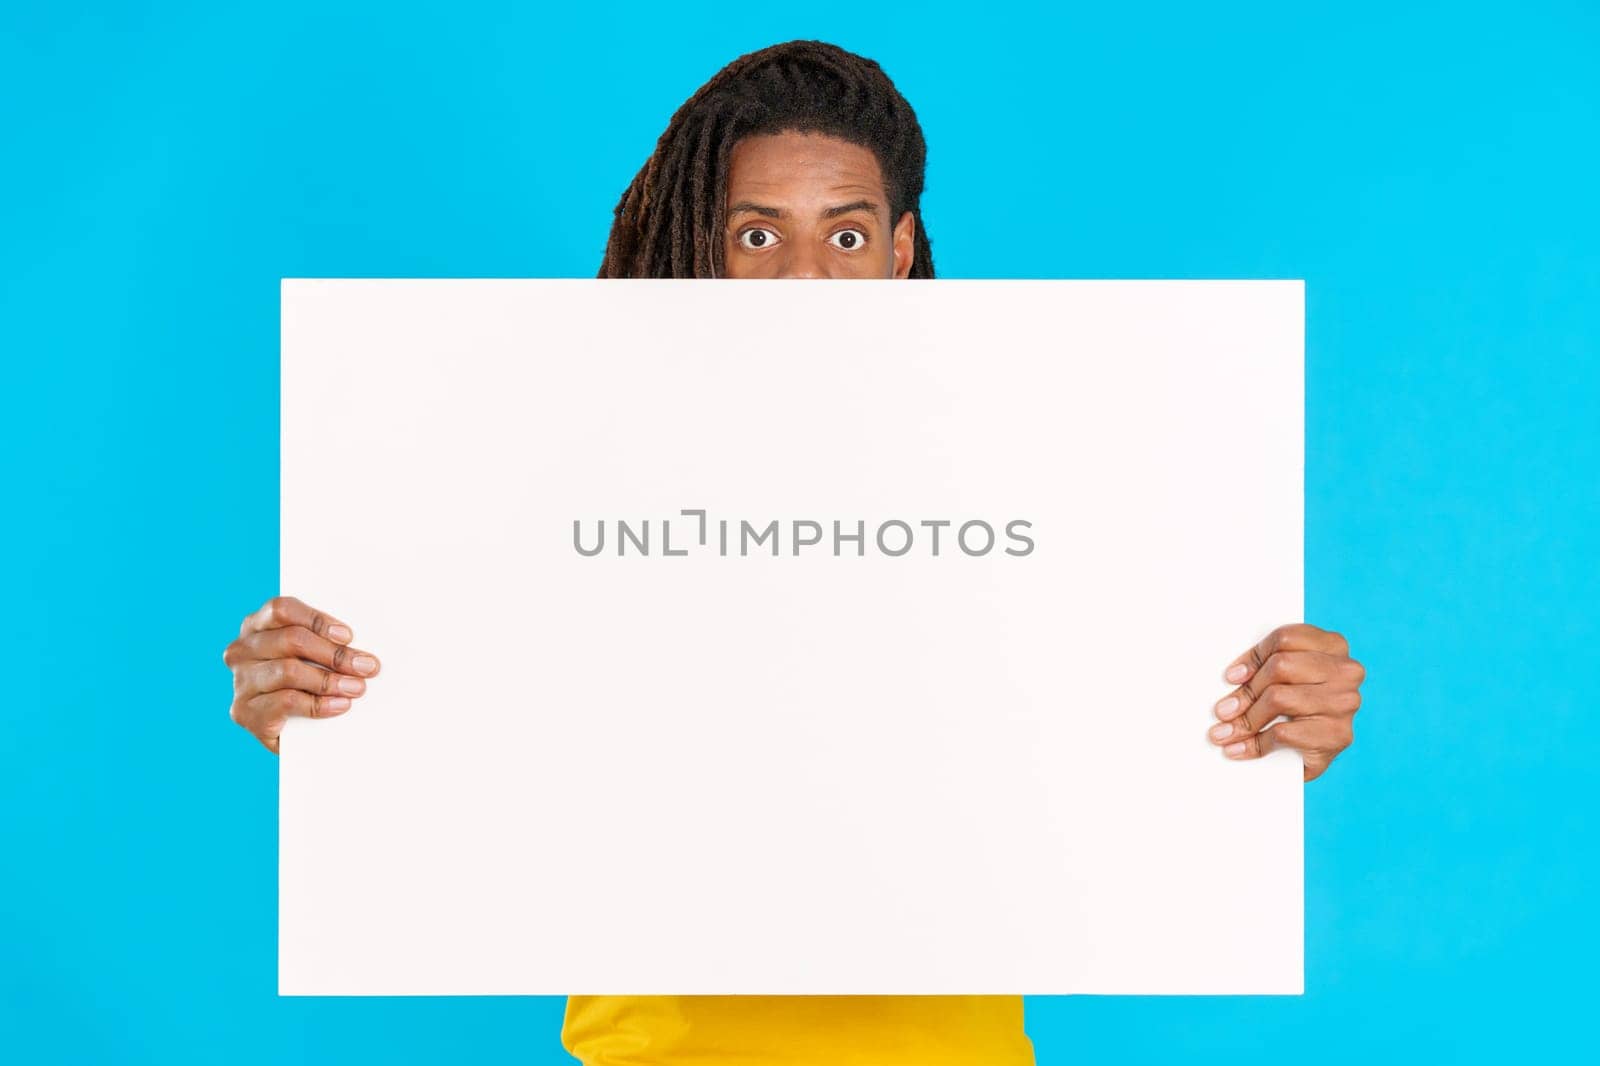 Surprised latin man with dreadlocks hiding behind a blank board in studio with blue background